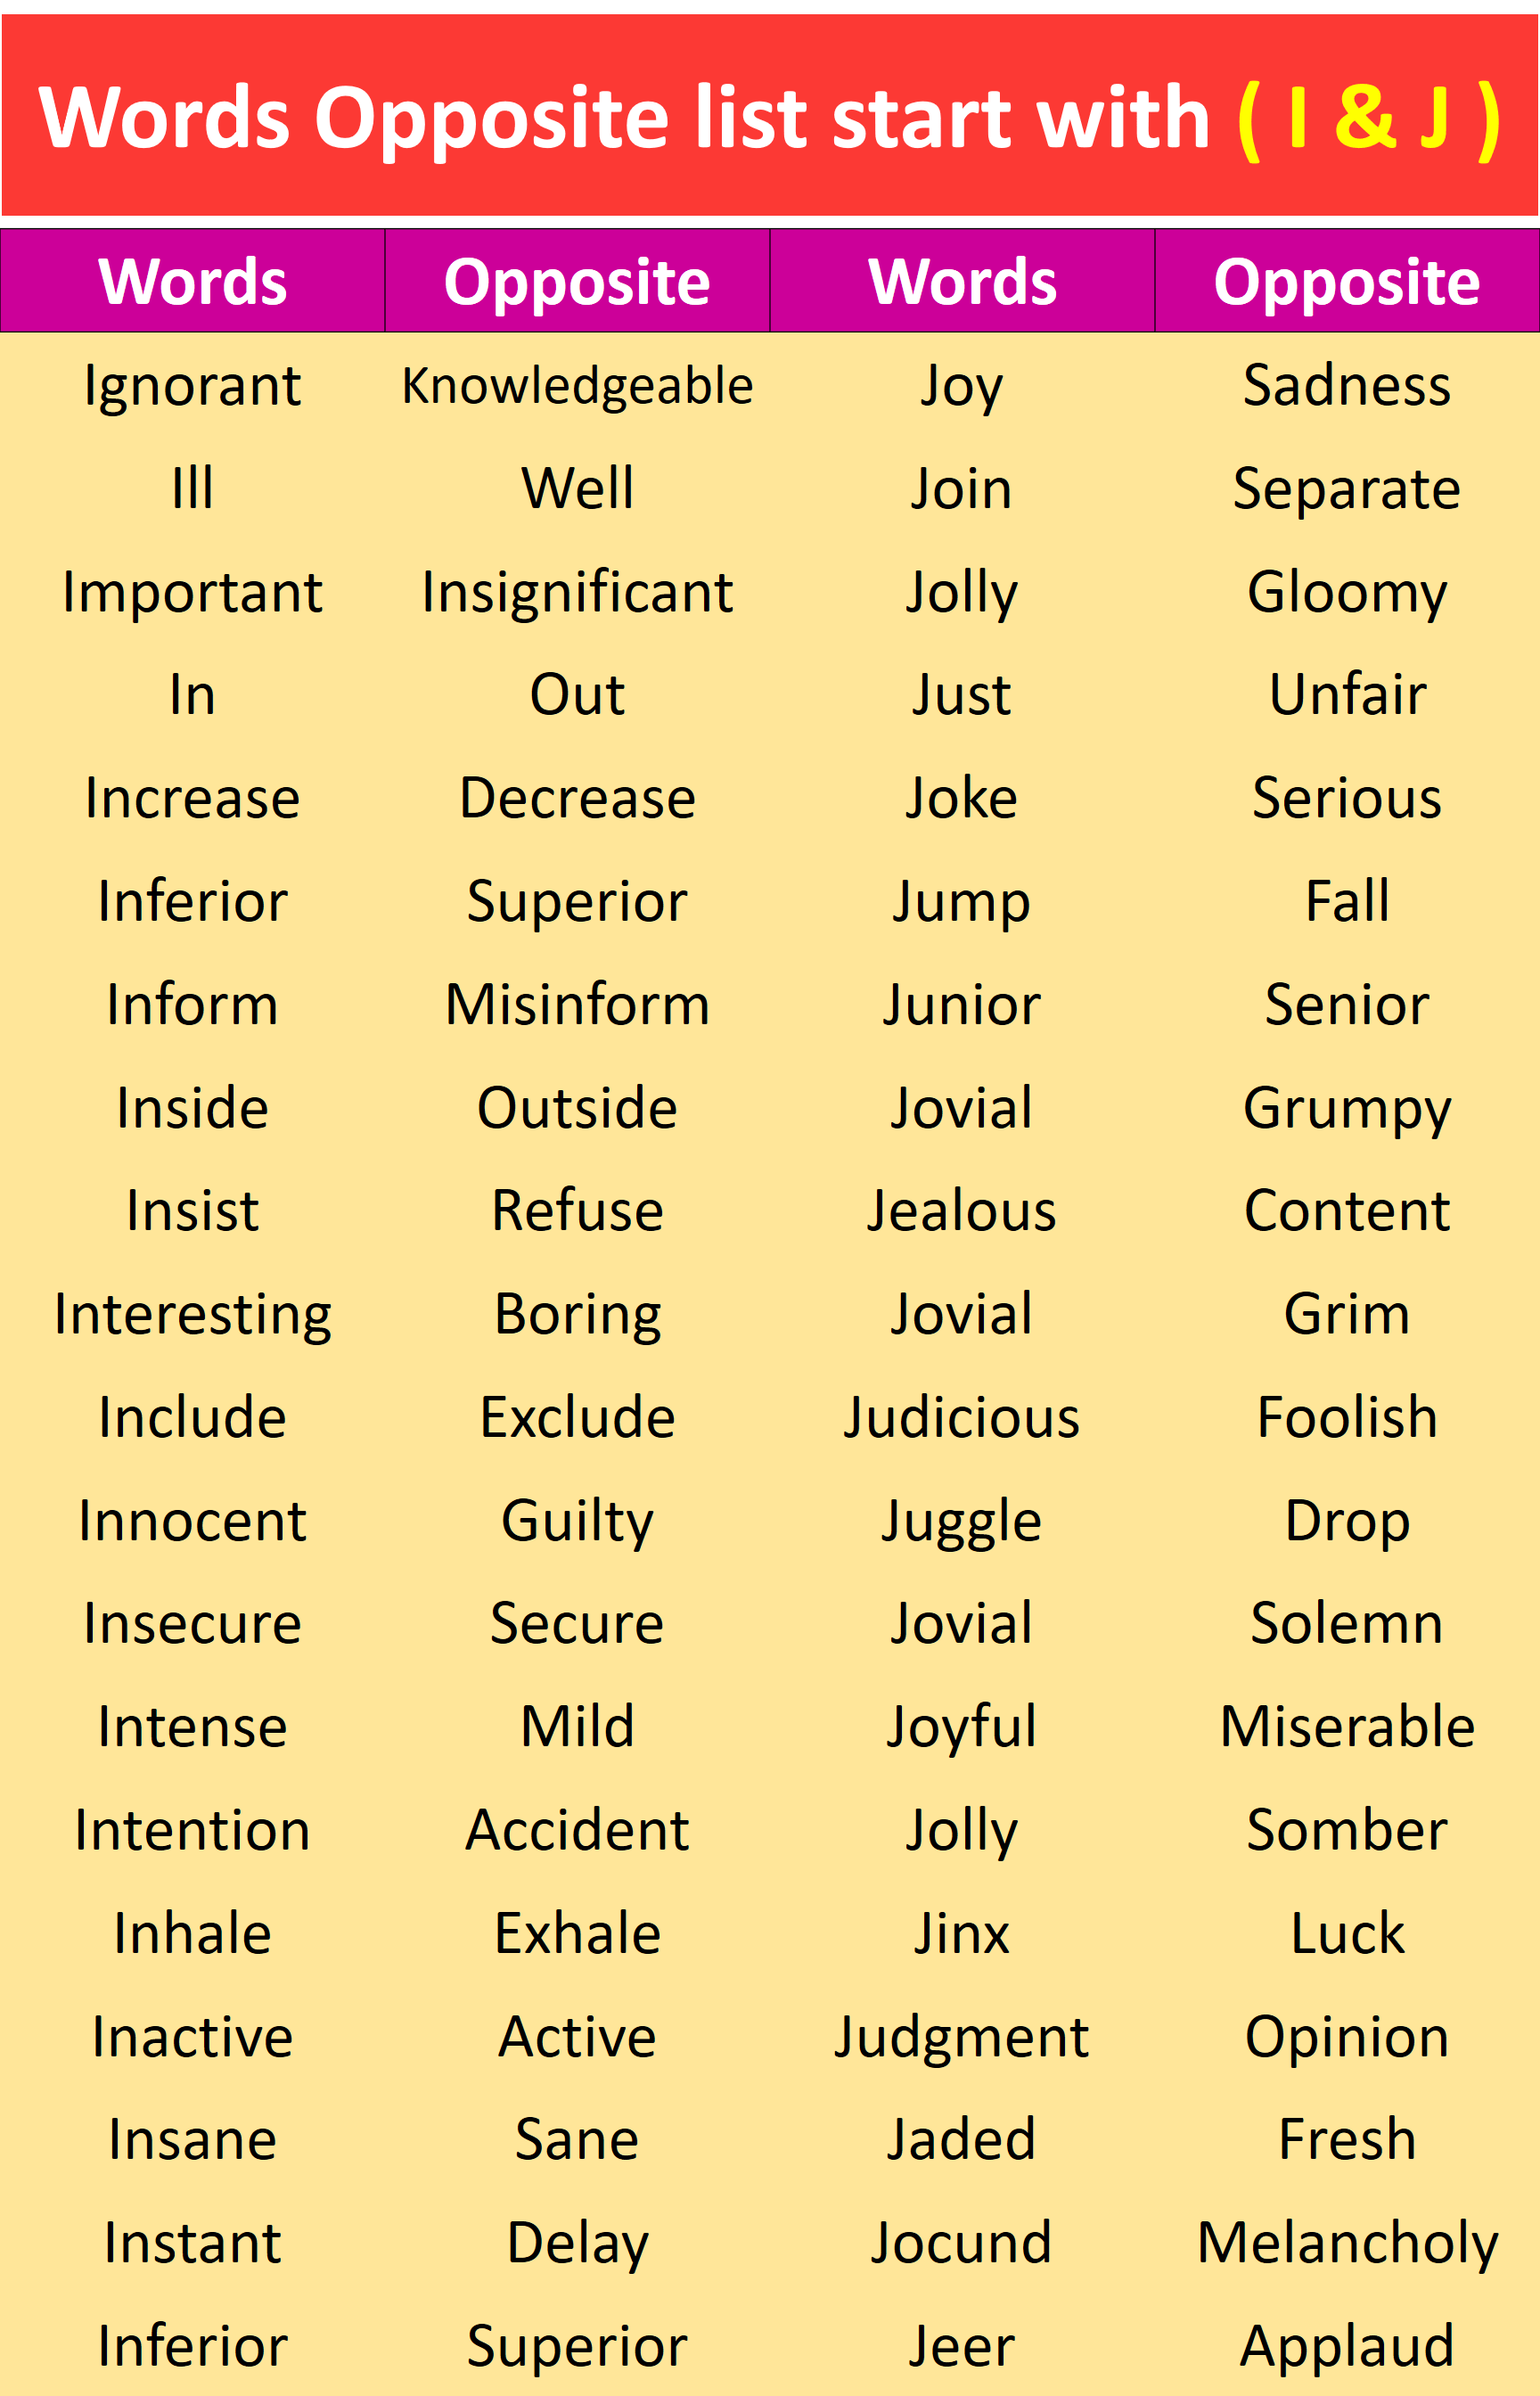 Words Opposite List From A to Z | Words Opposite I & J